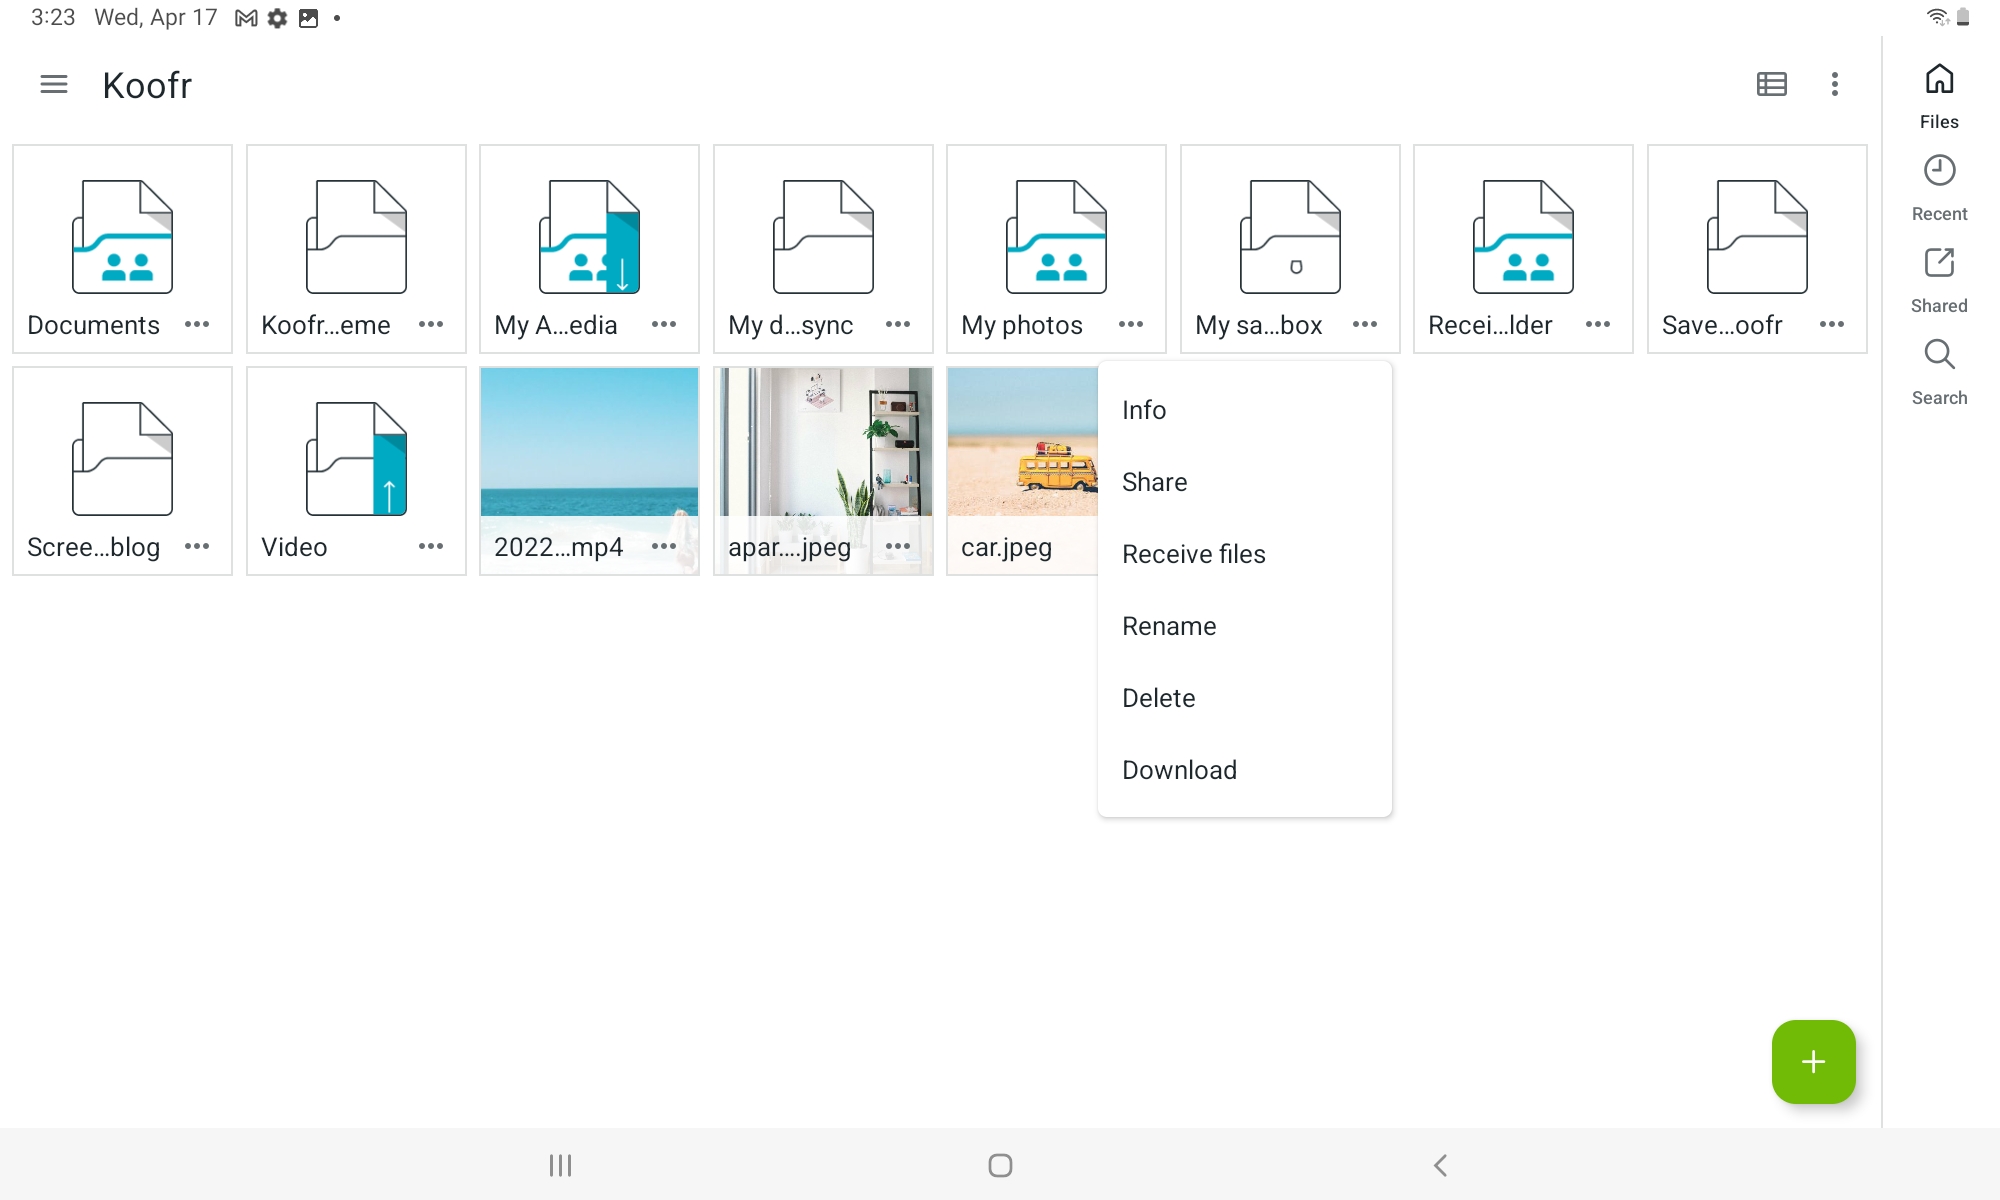 File and folder options in Koofr android mobile app